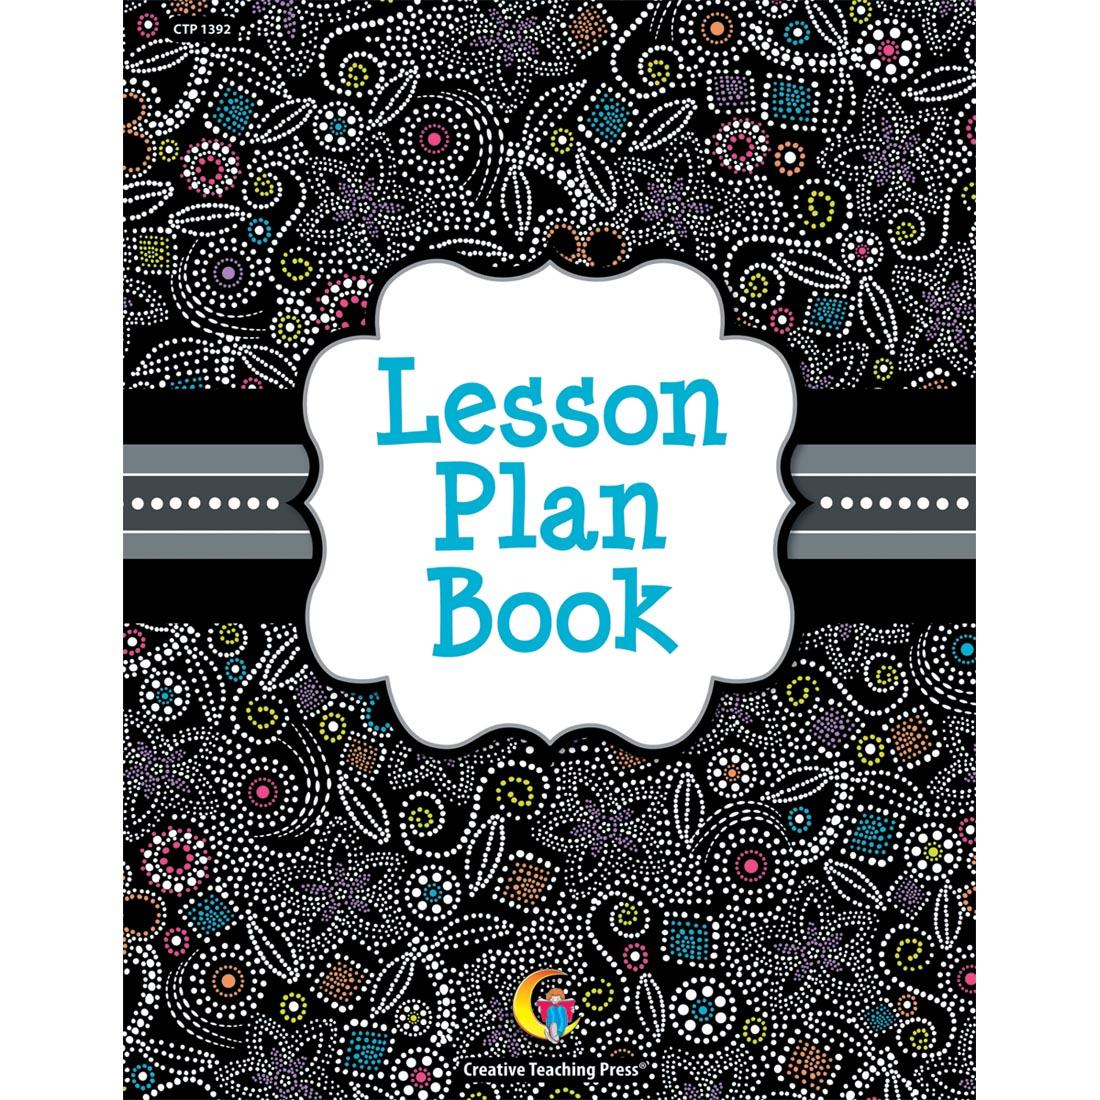 Lesson Plan Book from the Black & White Collection by Creative Teaching Press